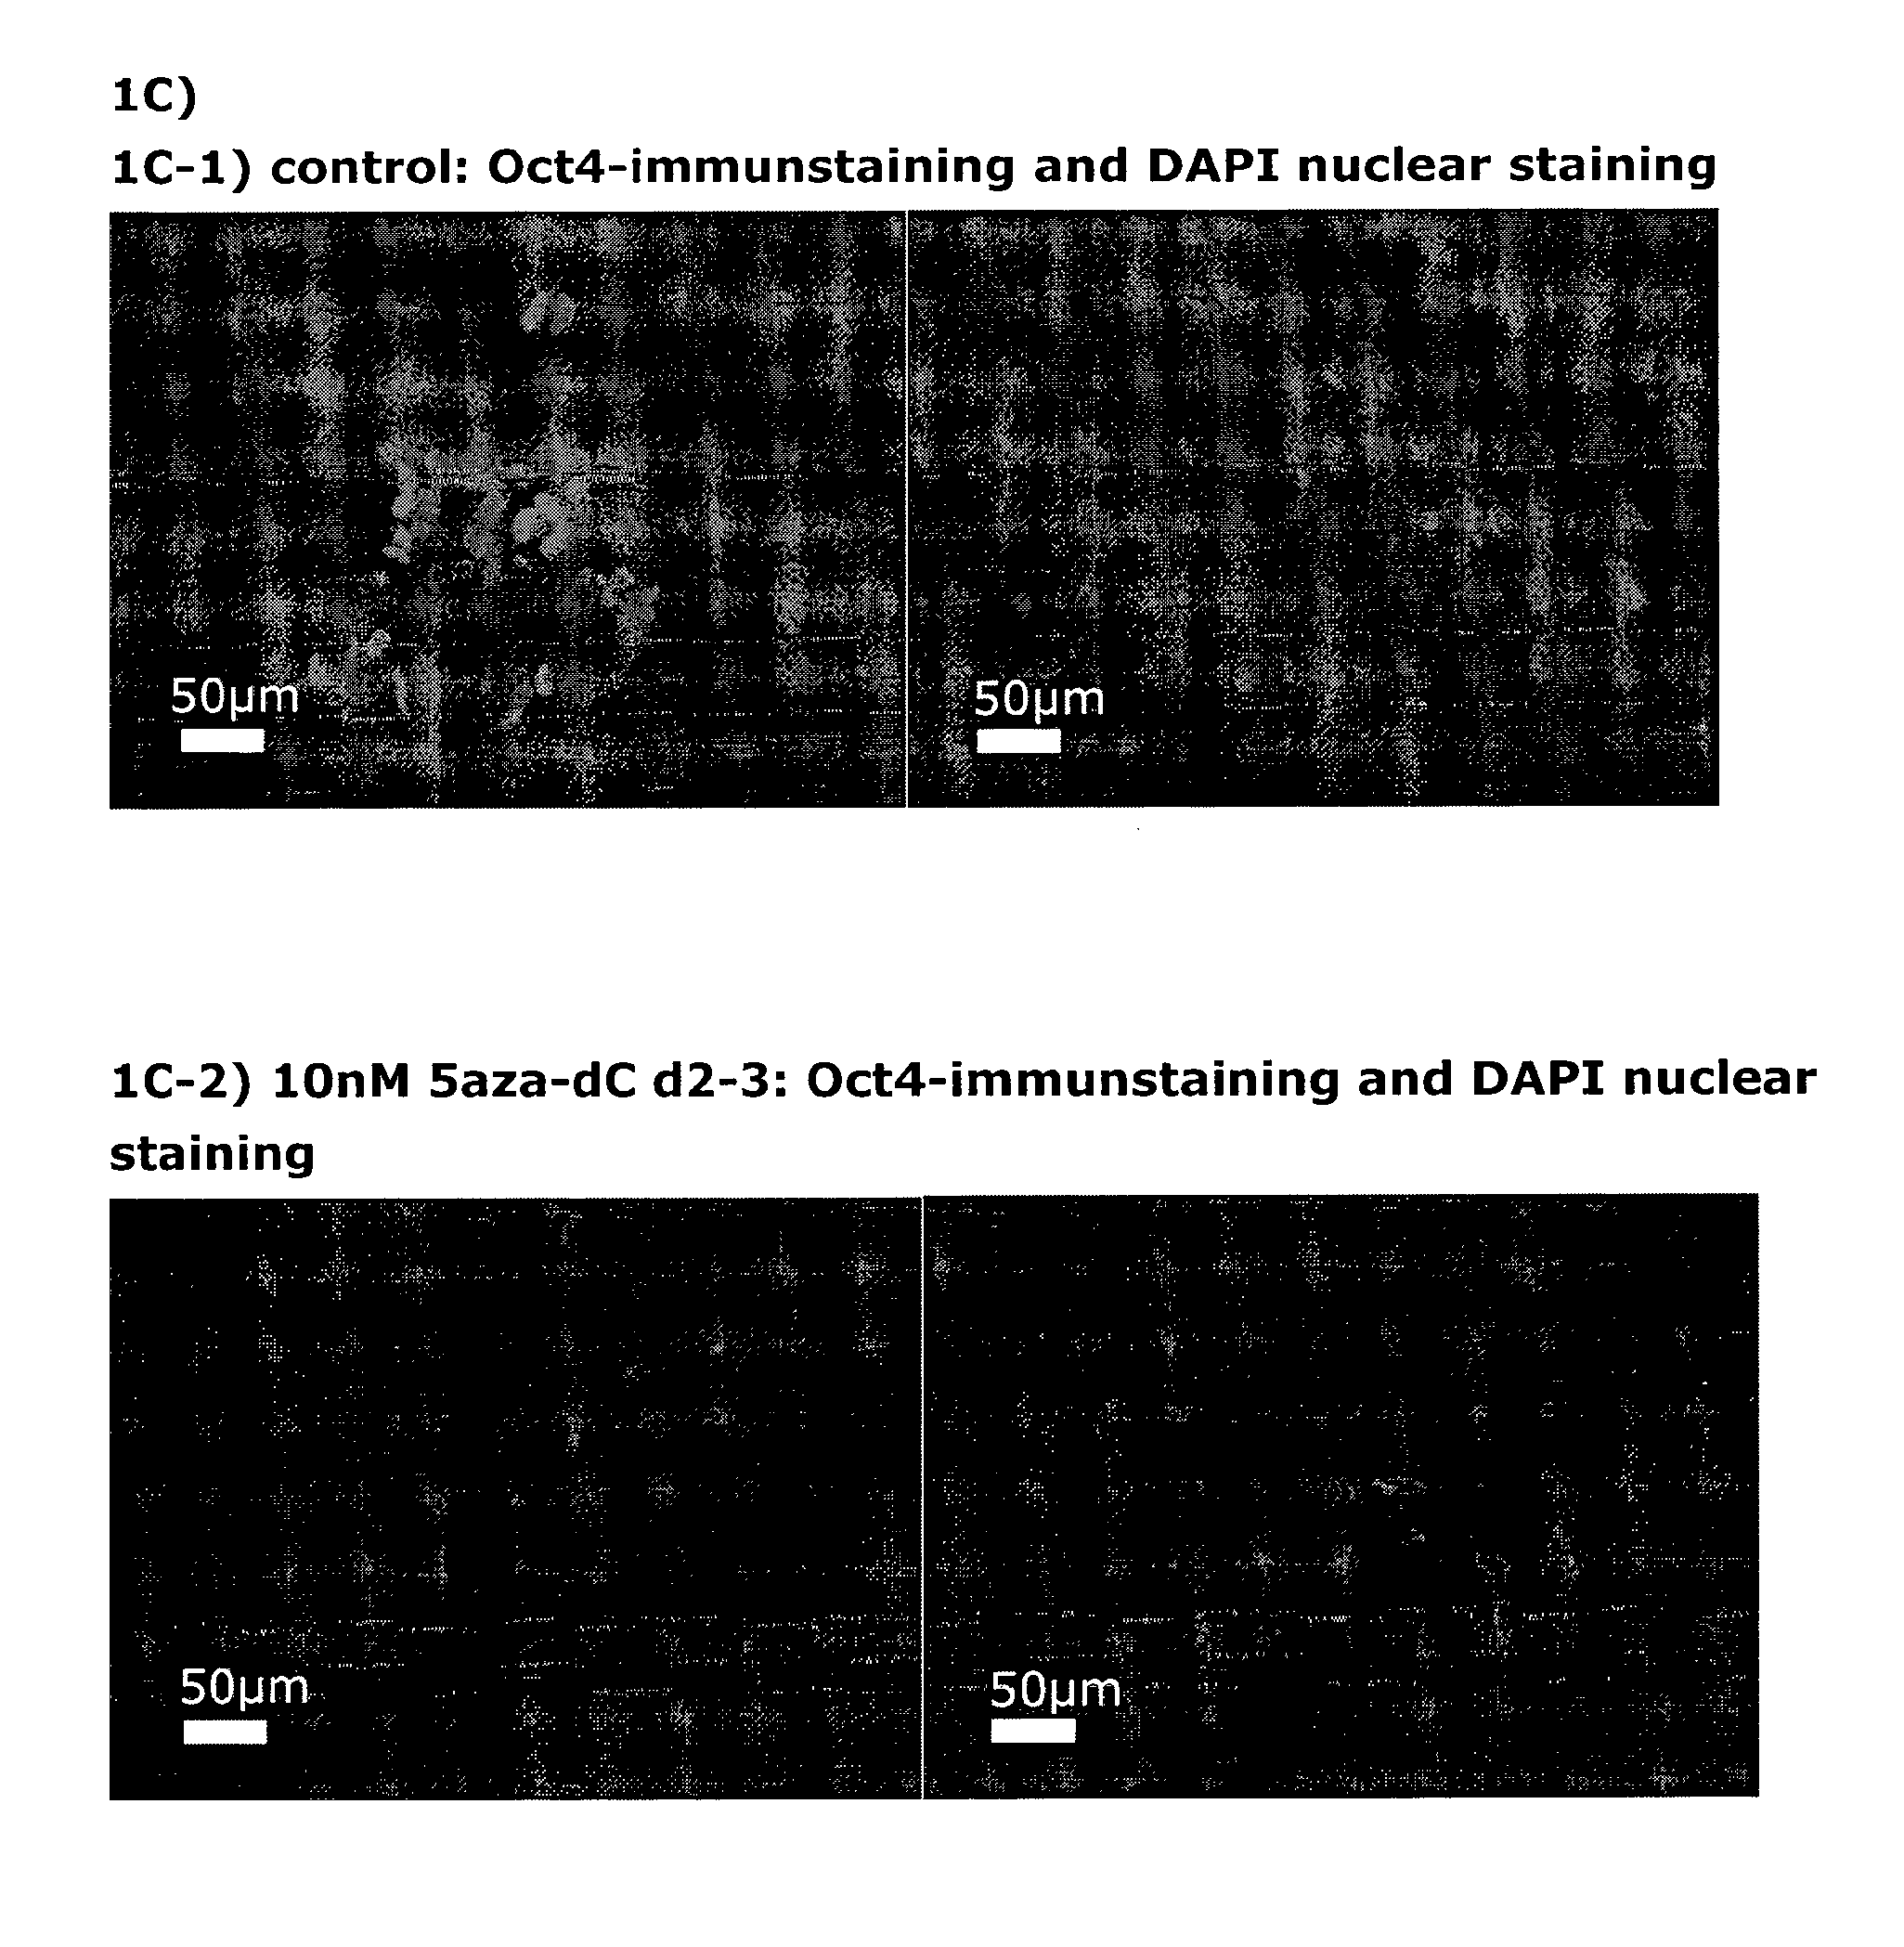 Improved methods for producing mammalian pluripotent stem cell-derived endodermal cells